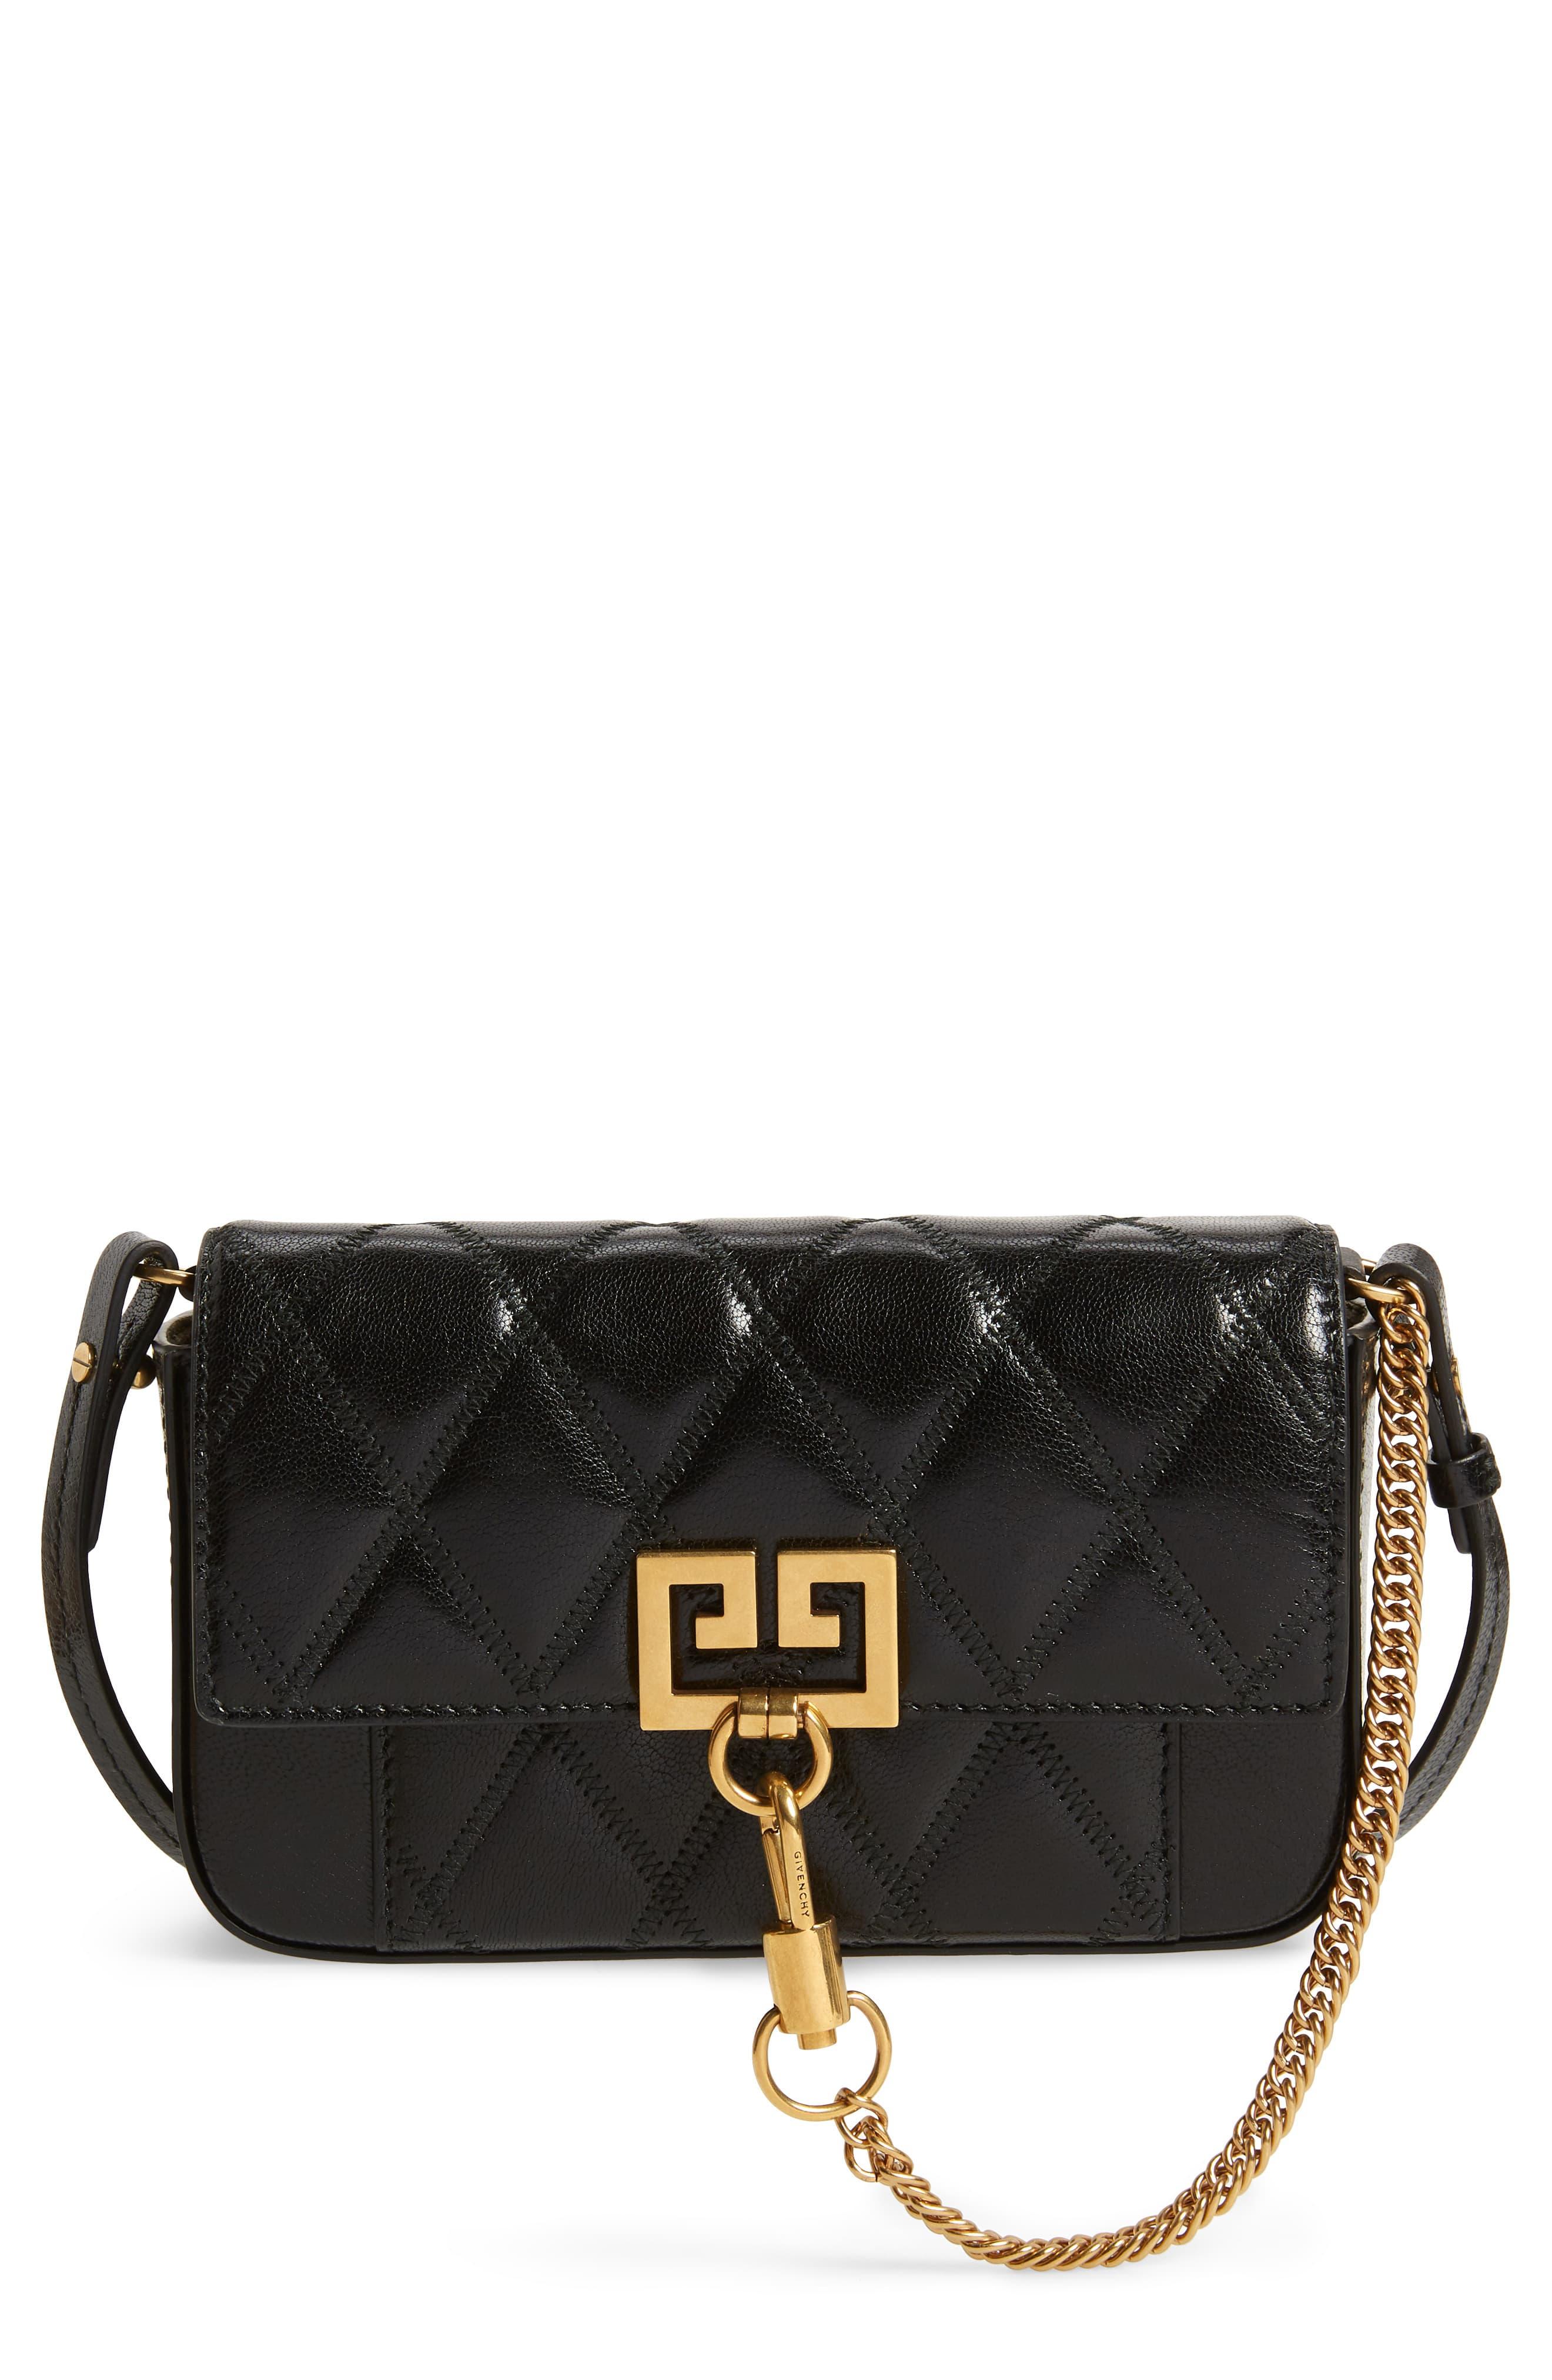 Givenchy Mini Pocket Quilted Convertible Leather Bag in Black - Lyst